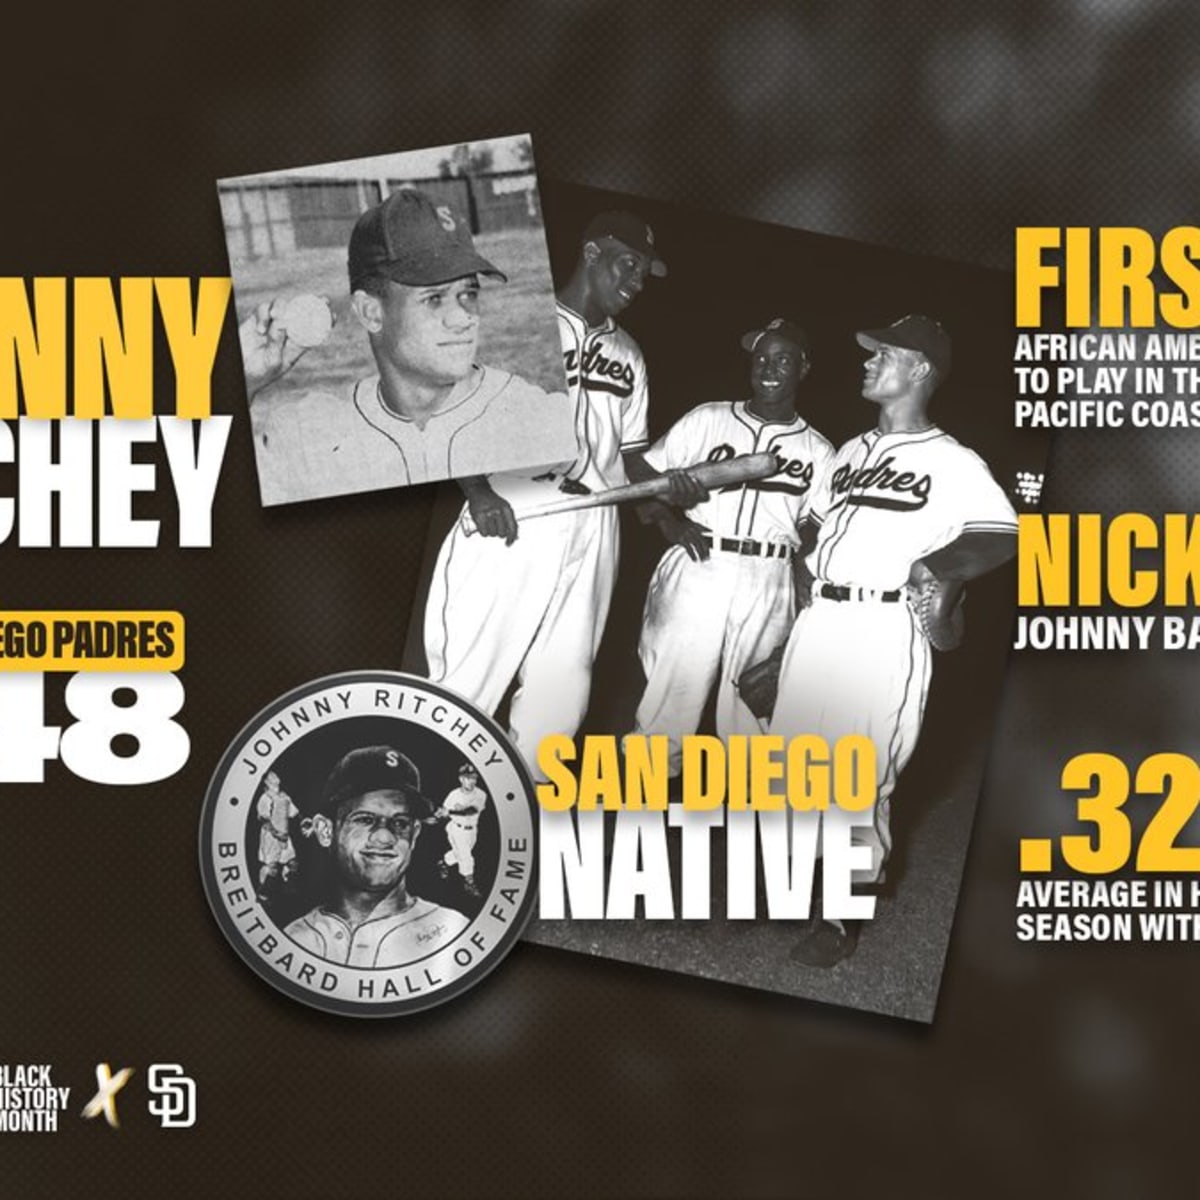 JOHNNY RITCHEY IS THE FIRST AFRICAN AMERICAN BASEBALL PLAYER TO